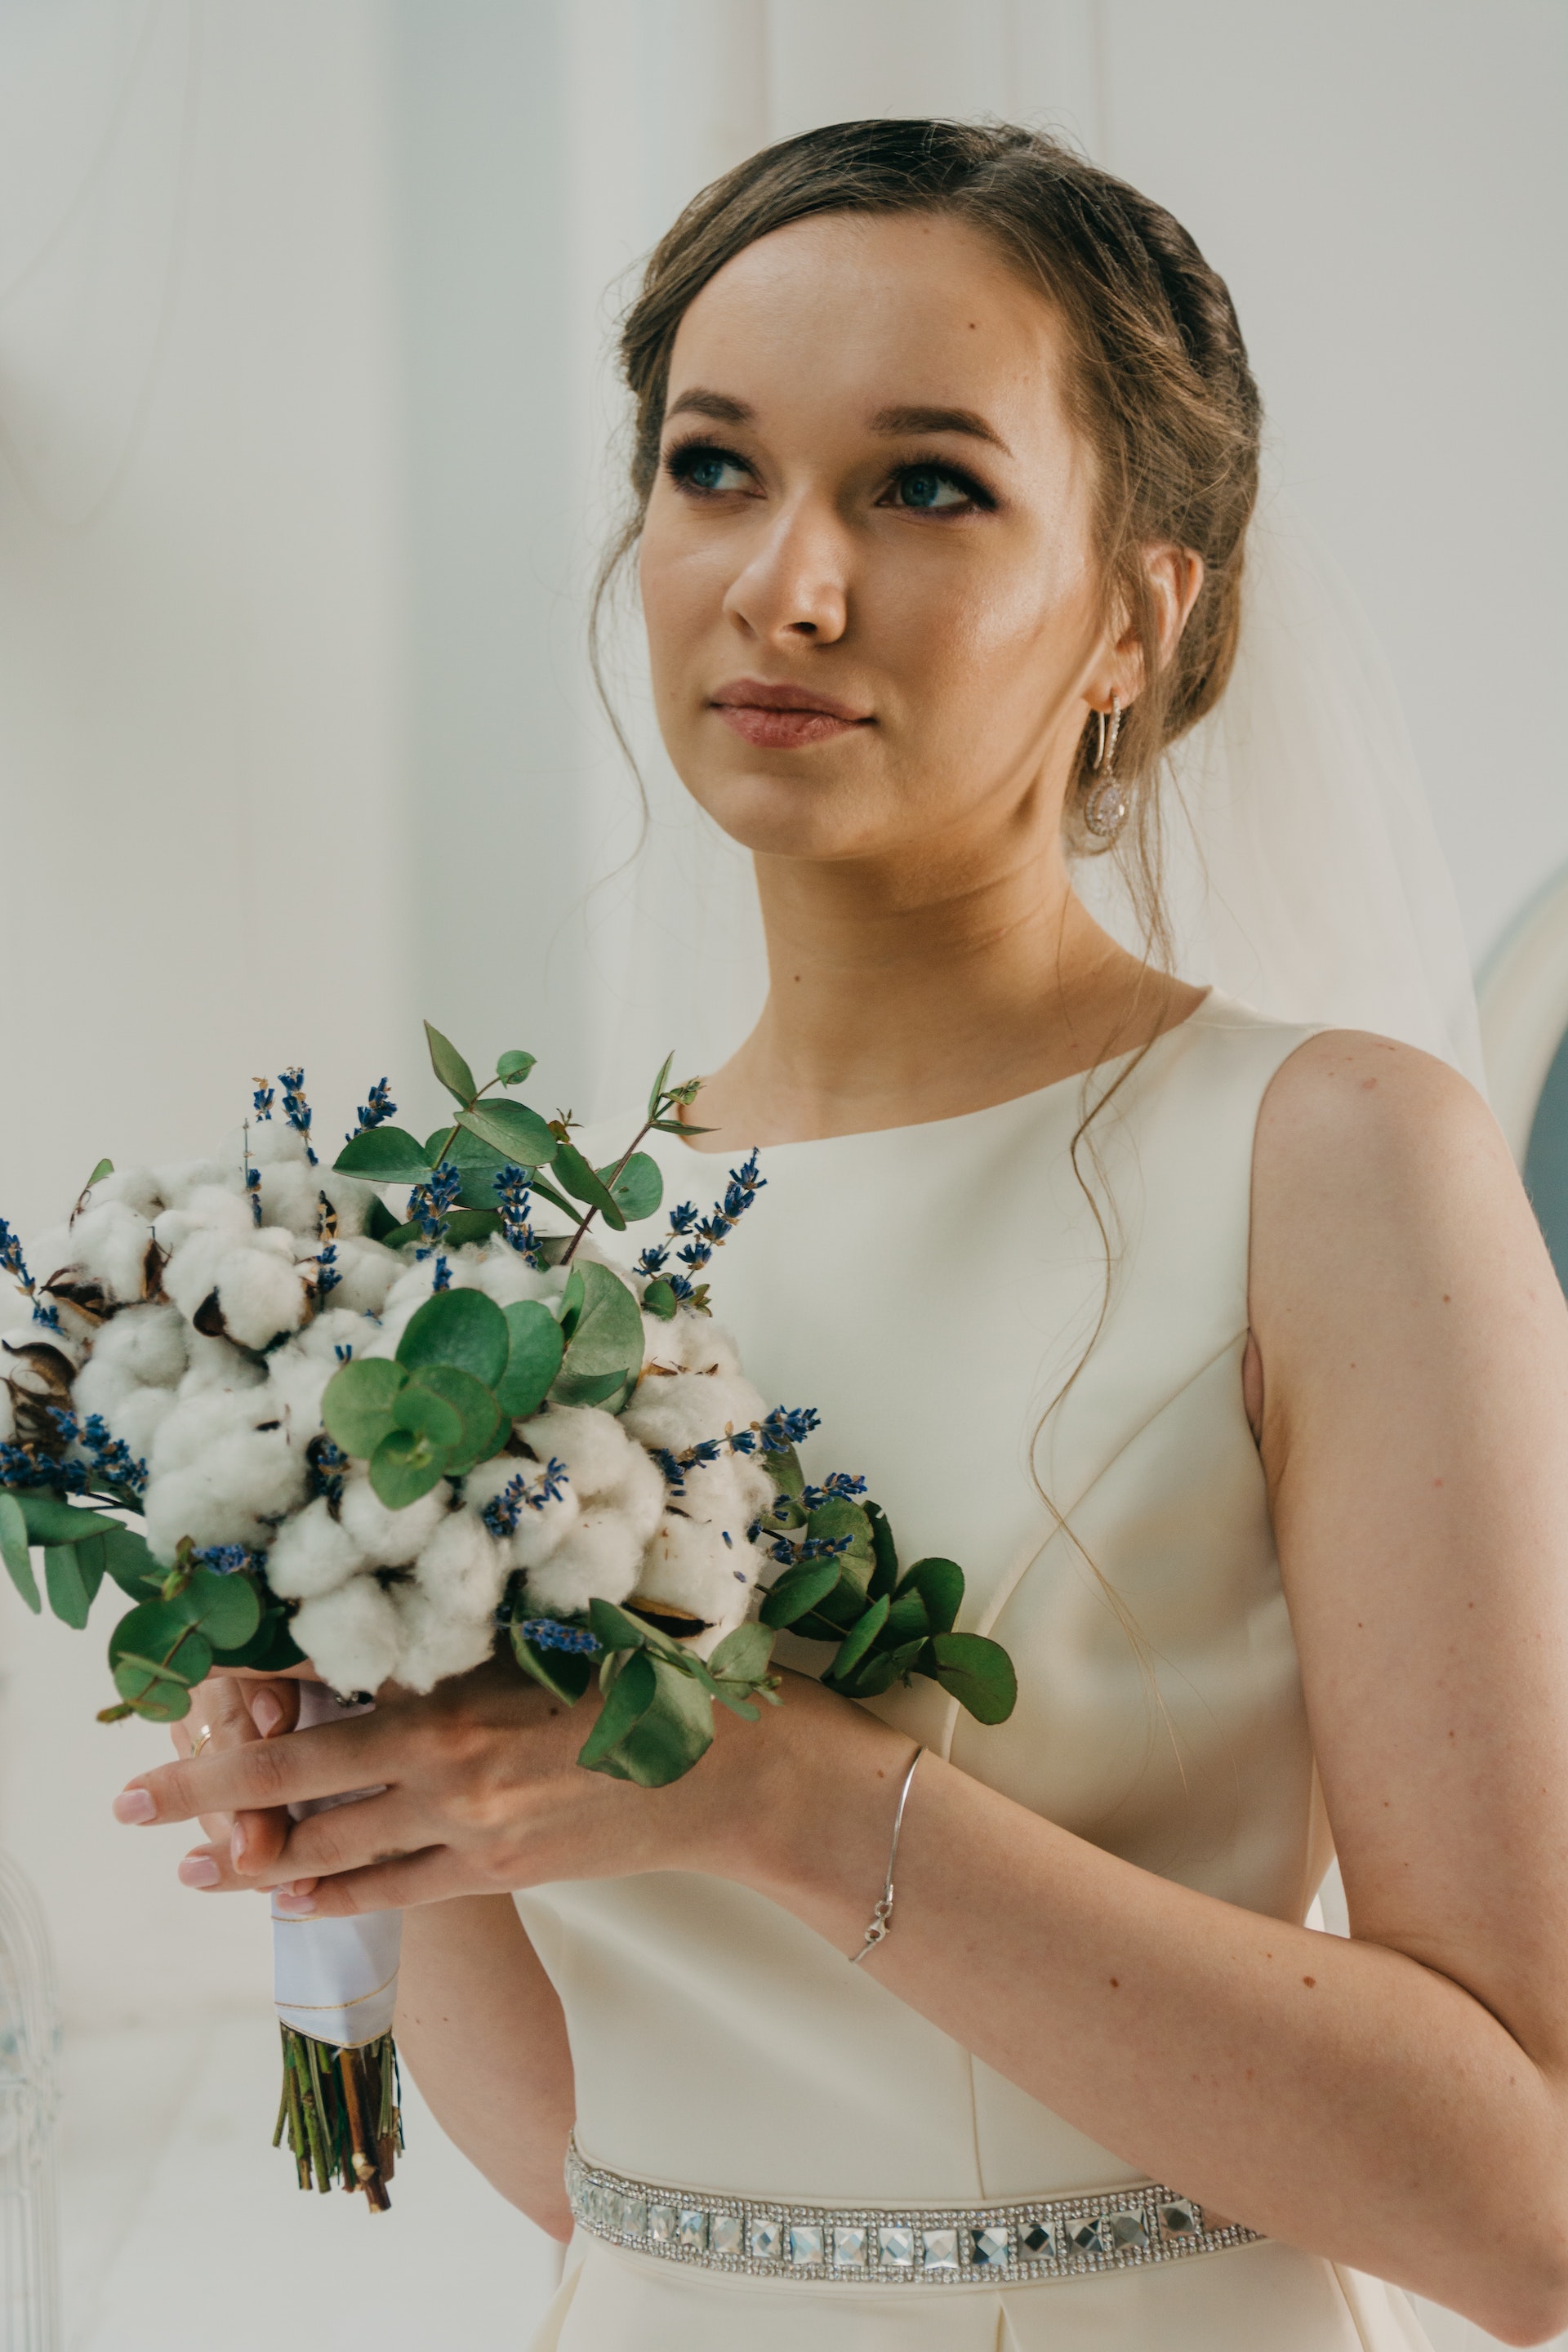 A woman in a white gown holding a bouquet of flowers | Source: Pexels